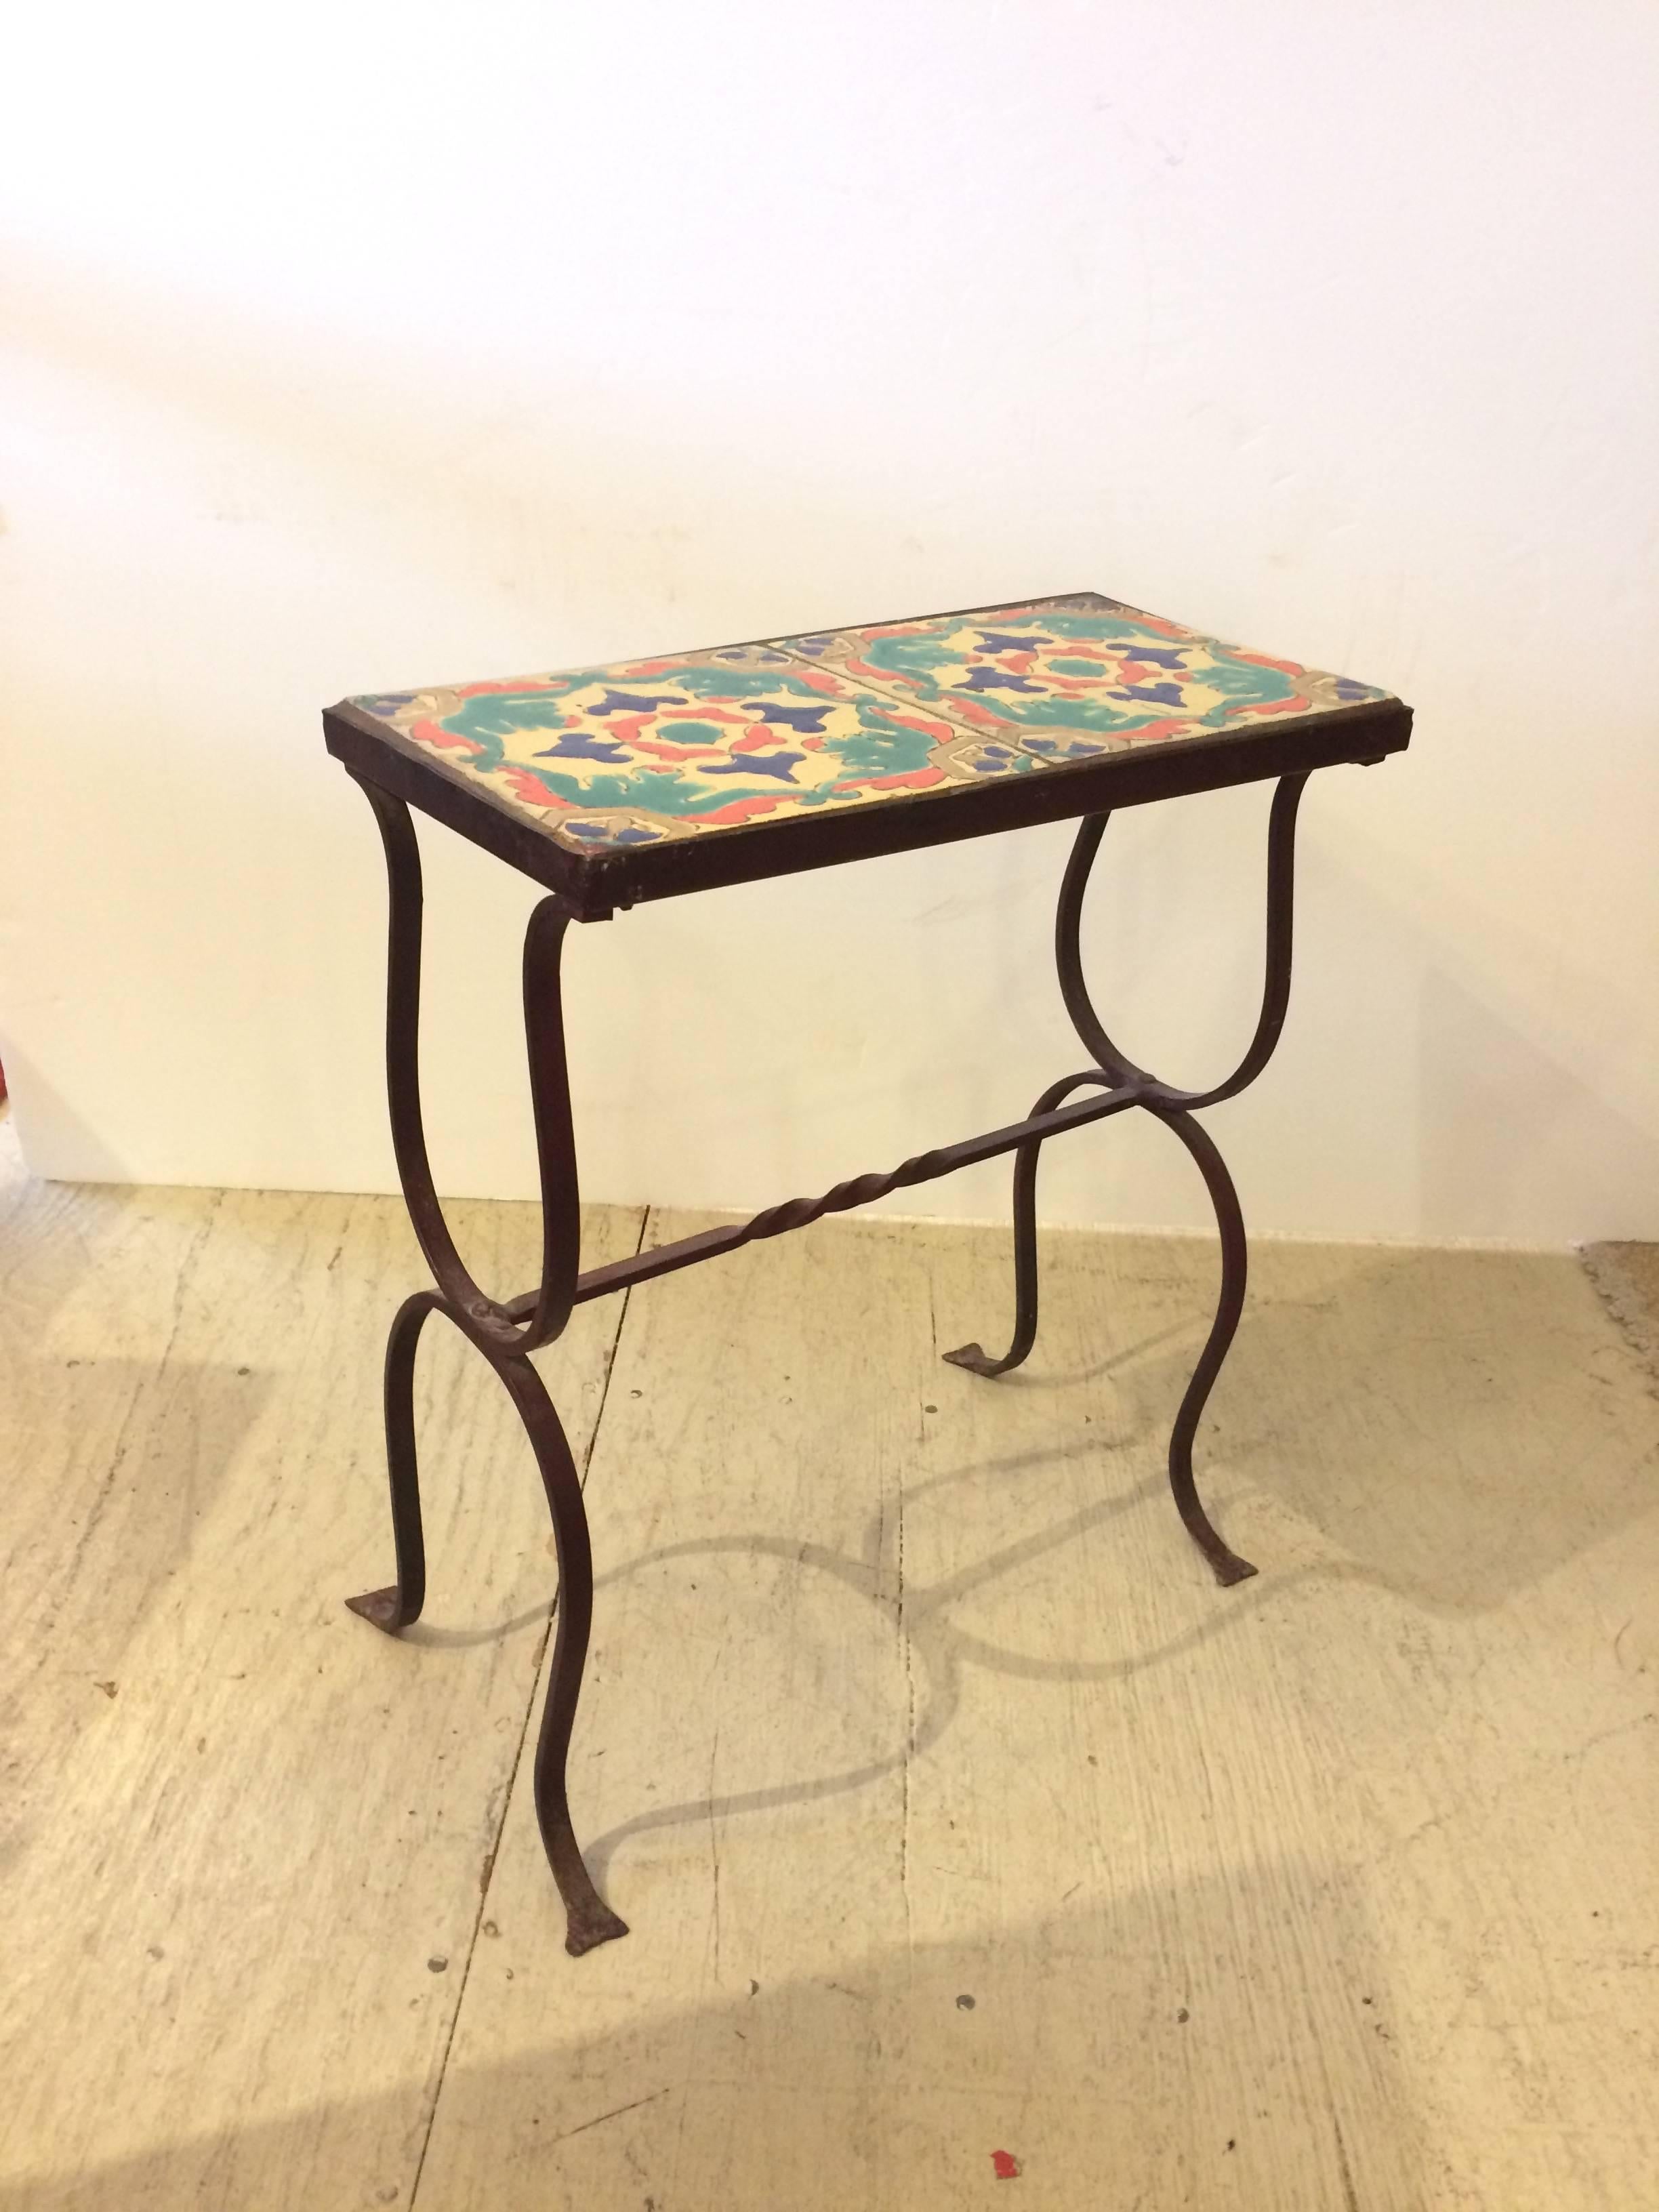 Wonderful vintage Arts & Crafts little side or drinks table having elegant curved wrought iron base and artisan crafted tile-top.